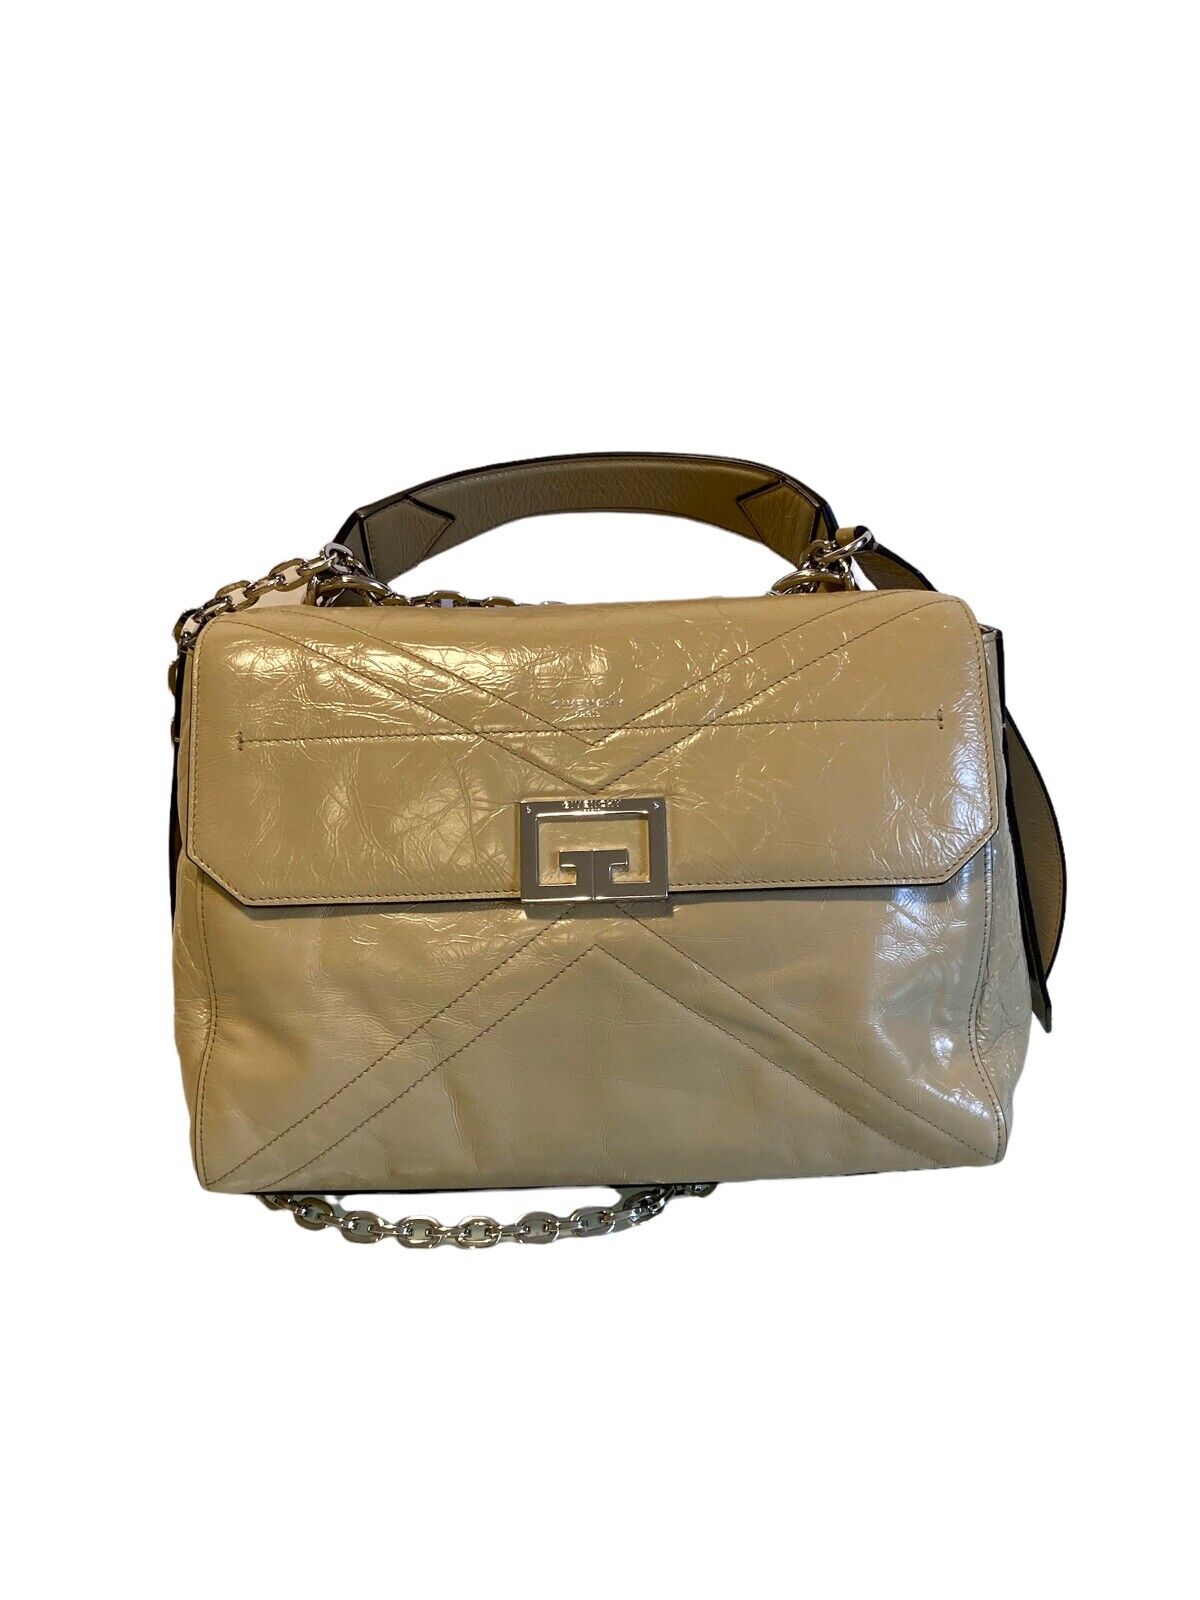 GIVENCHY $1990 Beige Creased Patent Leather Calfskin Medium ID 